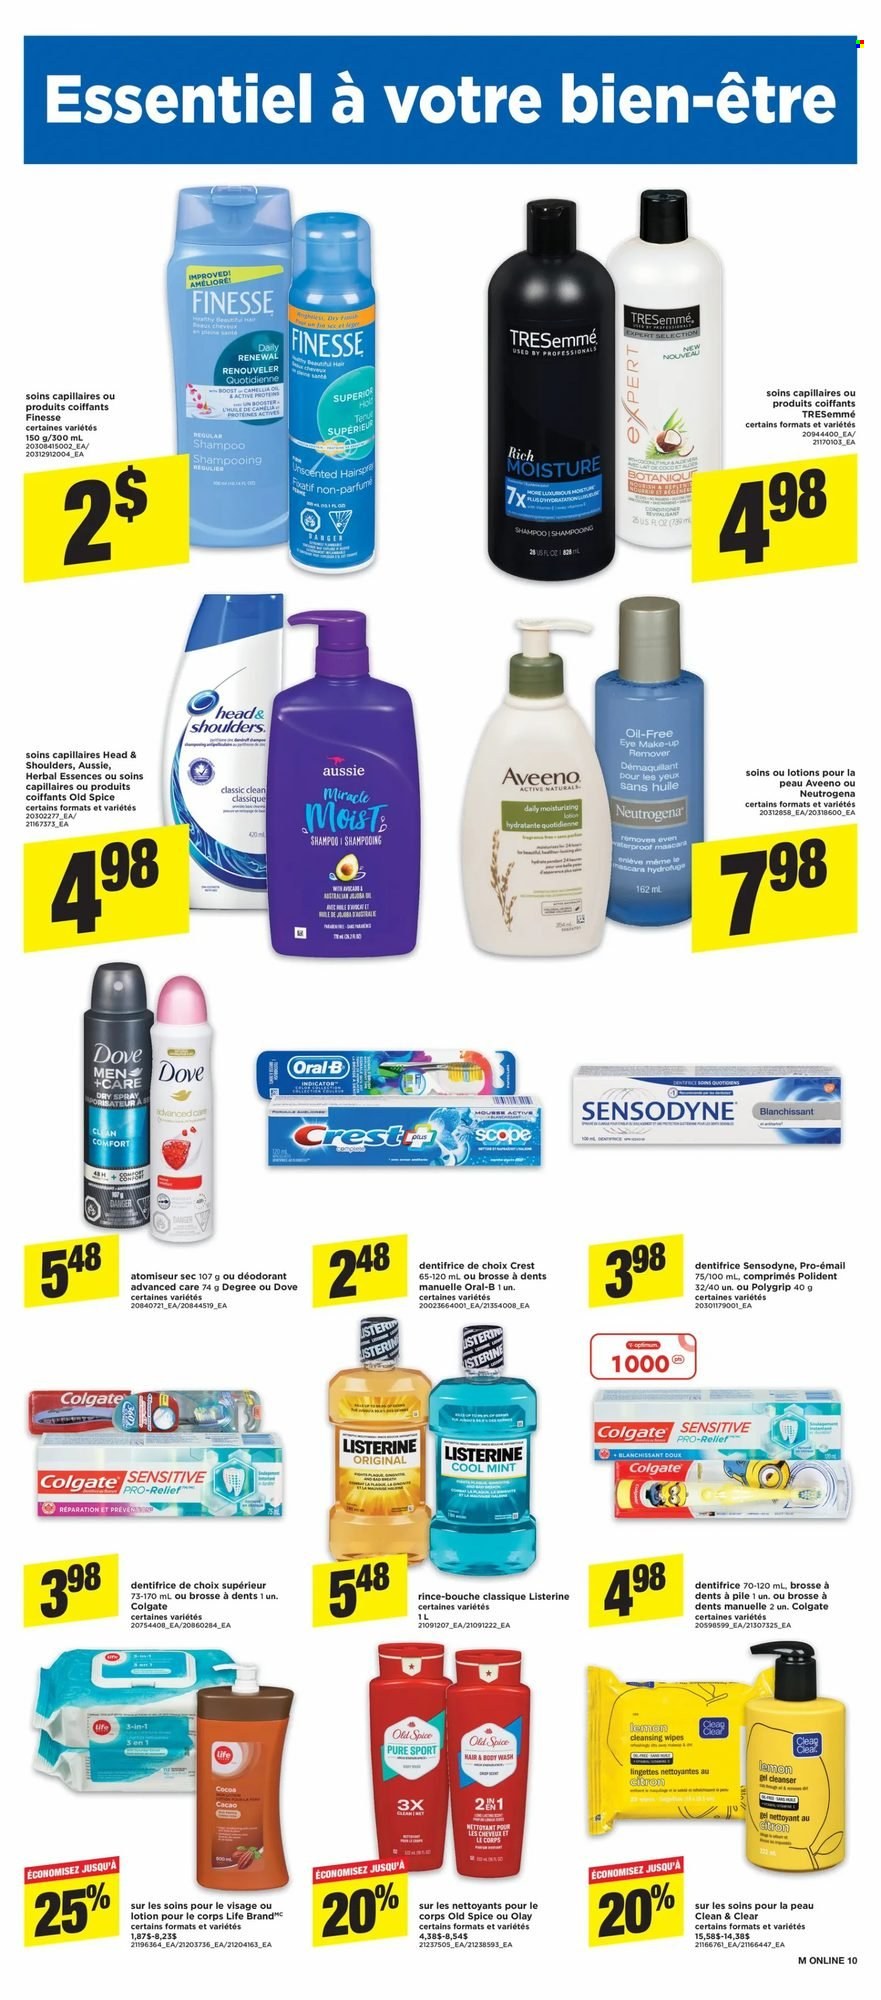 thumbnail - Maxi Flyer - September 23, 2021 - September 29, 2021 - Sales products - cocoa, spice, cleansing wipes, wipes, Aveeno, body wash, Polident, Crest, Olay, Clean & Clear, Aussie, TRESemmé, Herbal Essences, body lotion, anti-perspirant, makeup, Dove, Colgate, Listerine, Neutrogena, shampoo, Head & Shoulders, Old Spice, Oral-B, Sensodyne, deodorant. Page 15.